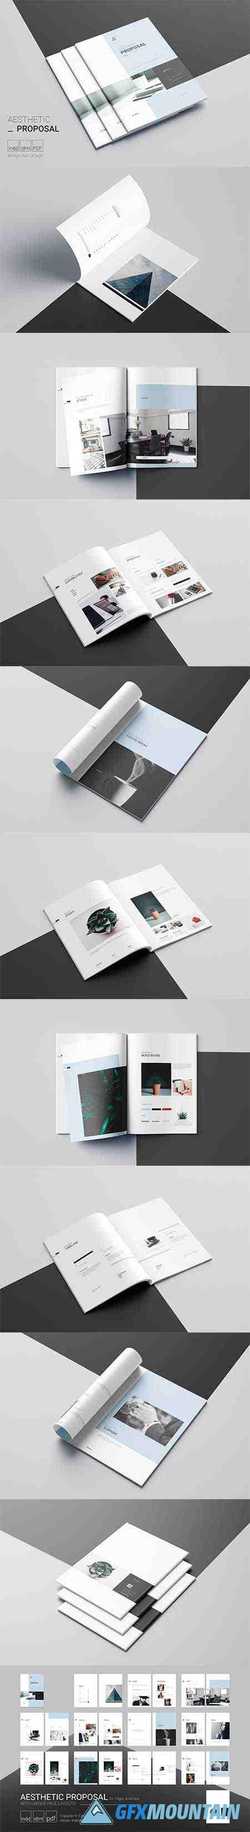 Aesthetic Proposal Template 3785799